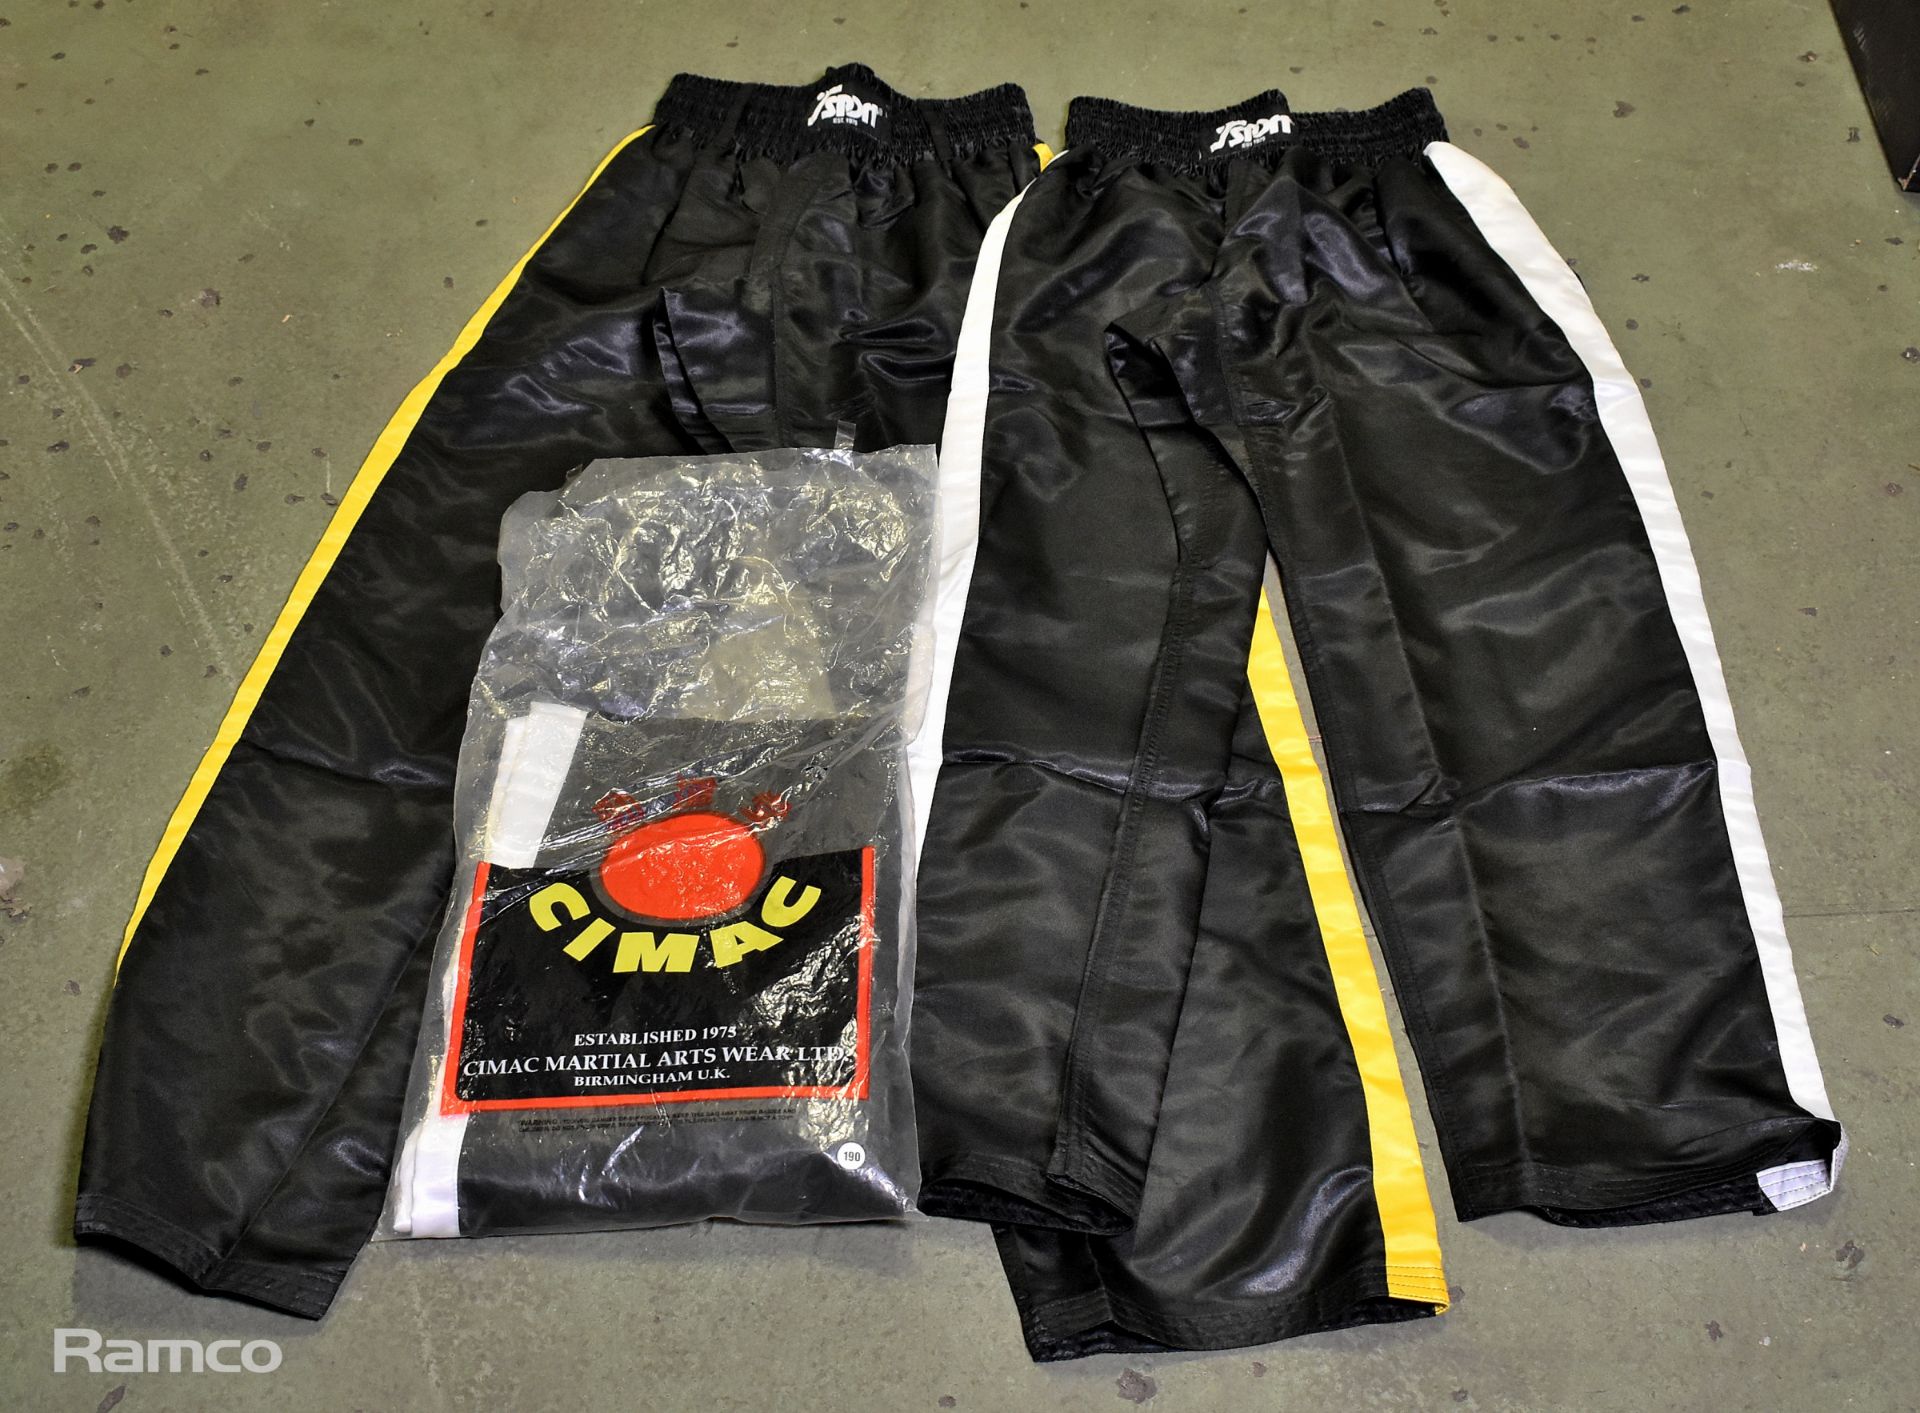 10x pairs of martial arts trousers - assorted - Image 2 of 4